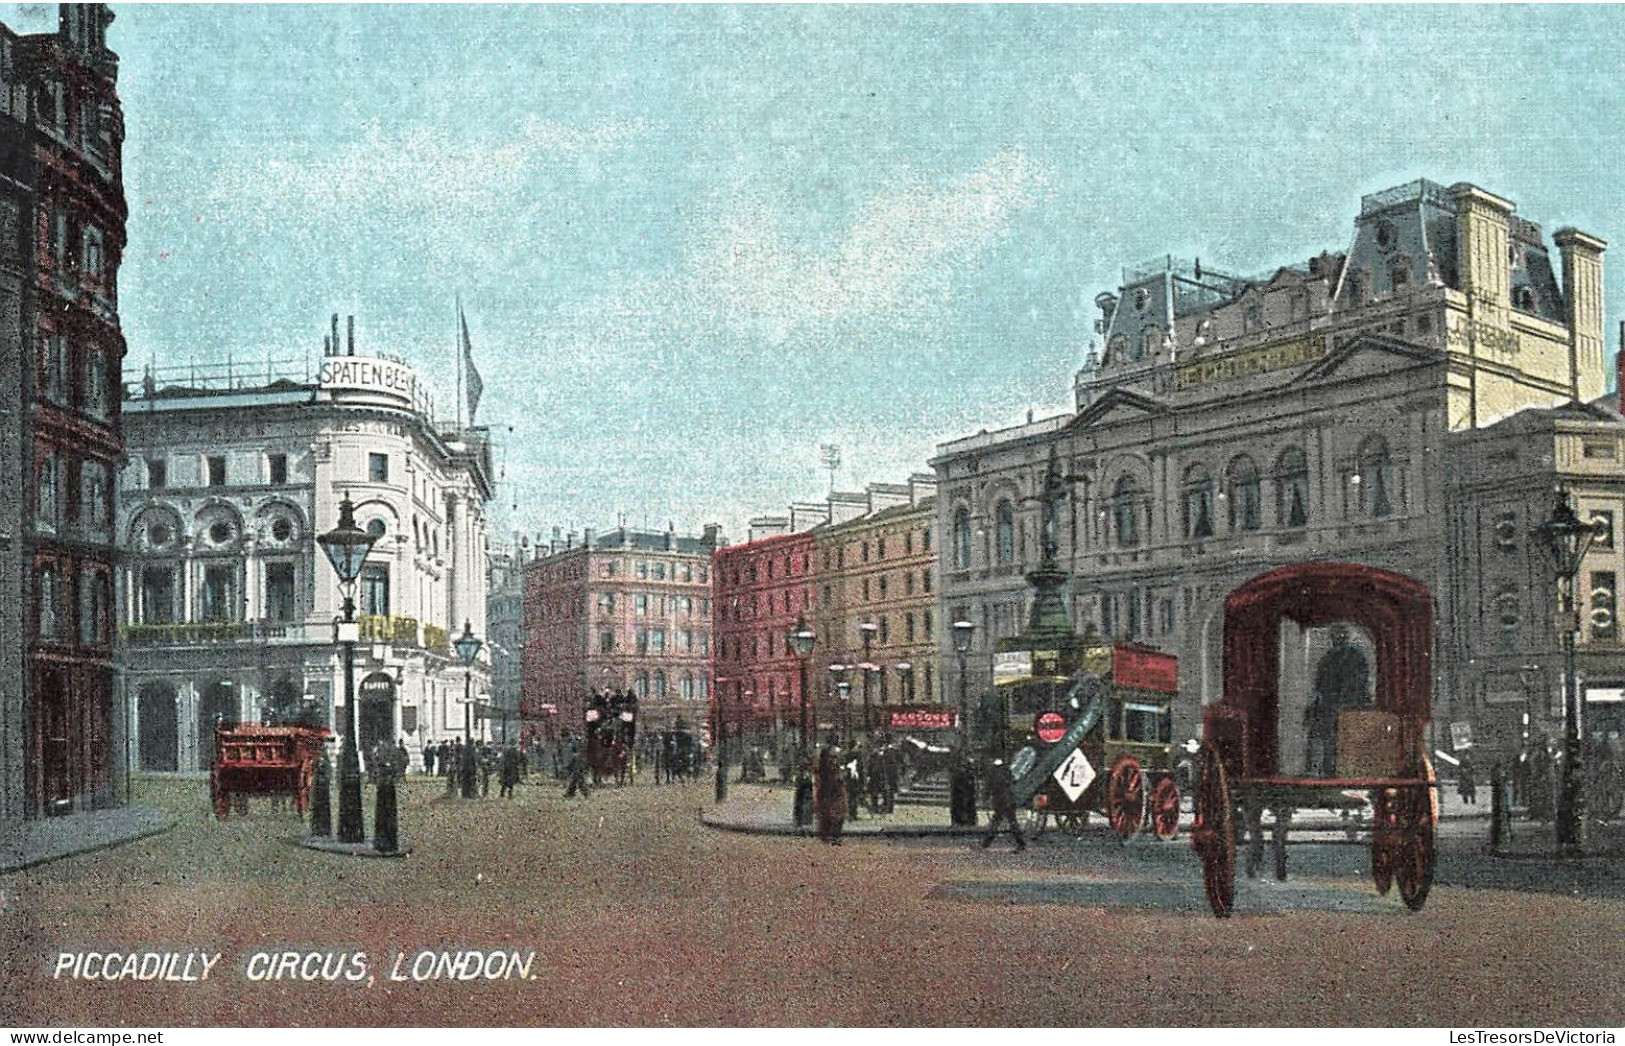 ROYAUME-UNI - Angleterre - London - Piccadilly Circus - Carte Postale - Piccadilly Circus